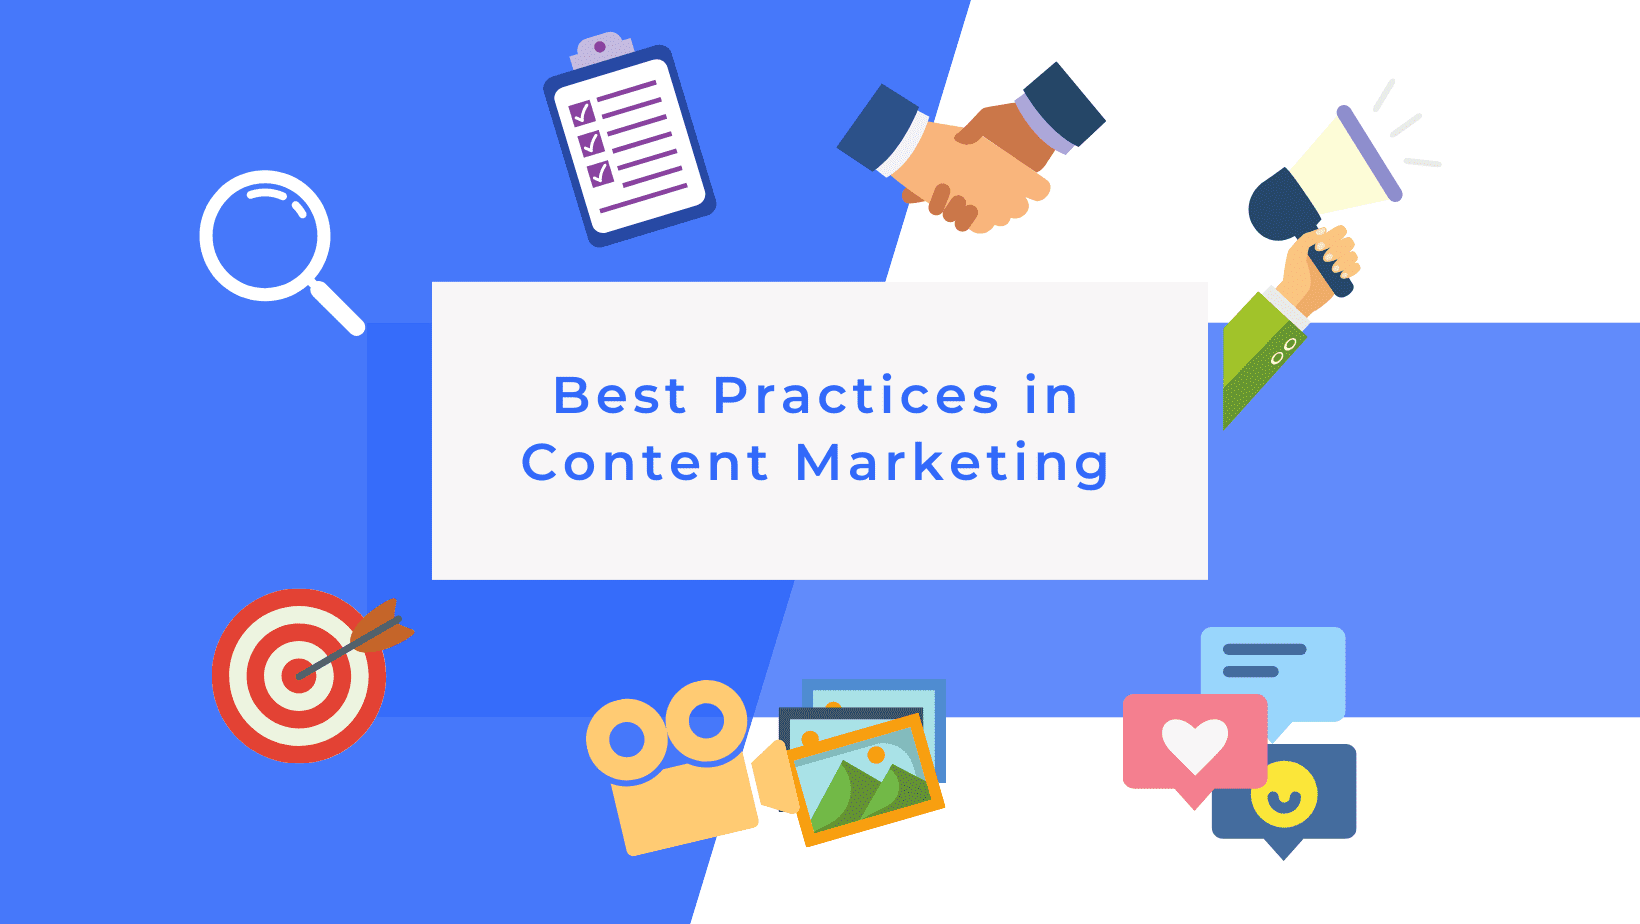 Featured image for the content marketing best practices